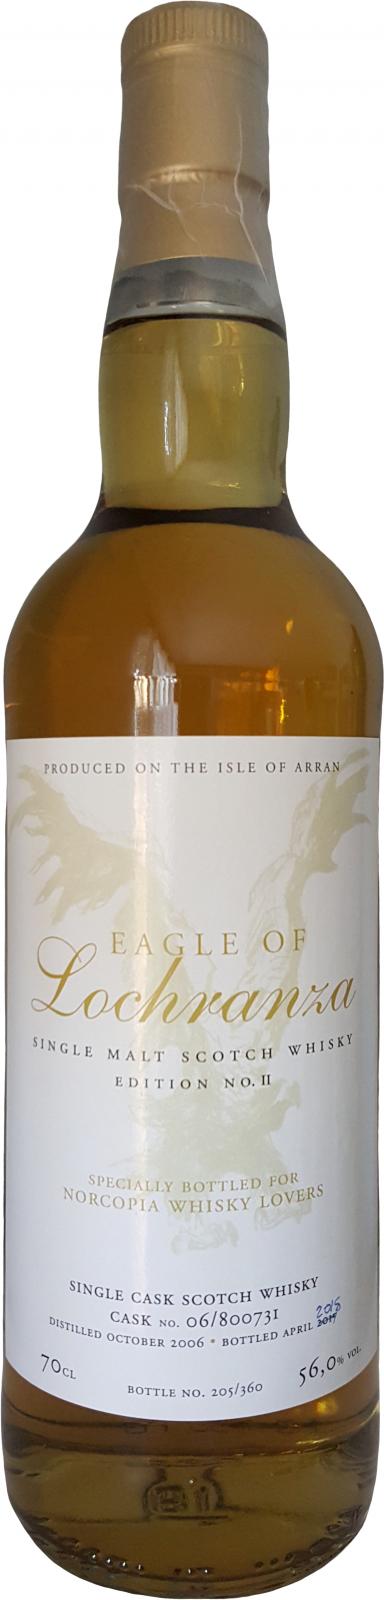 Eagle of Lochranza 2006 Private Bottling 06 800731 Norcopia Whisky Lovers 56% 700ml